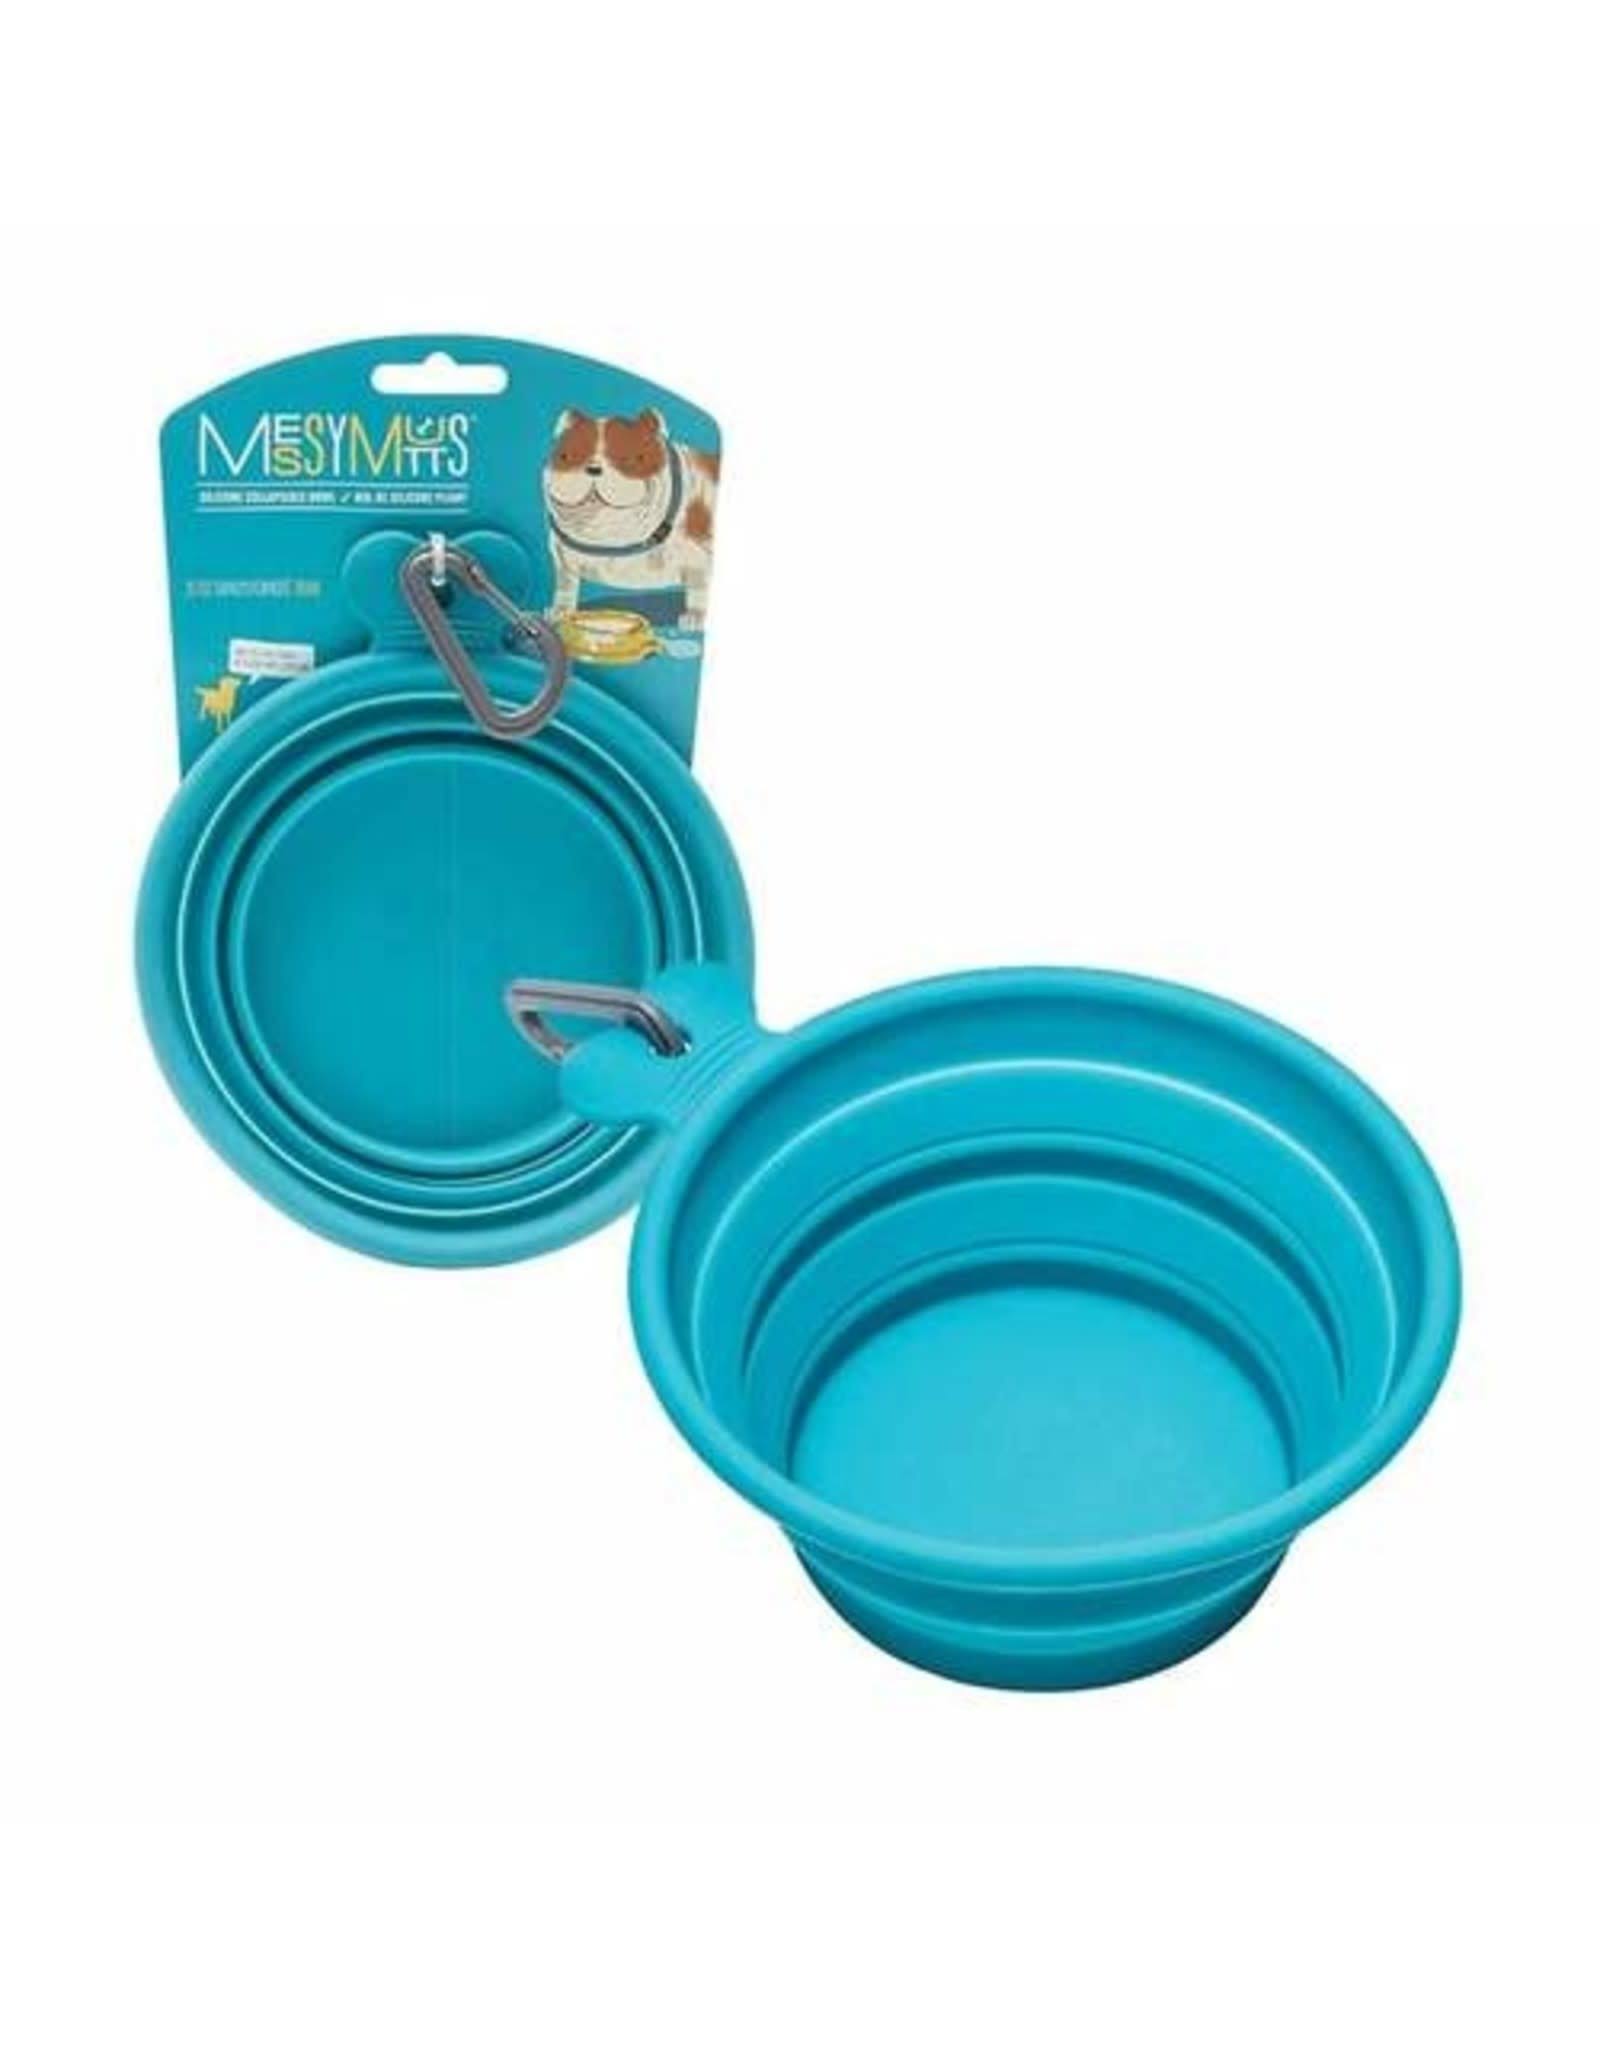 Messy Mutts Collapsible Silicone Dog Bowl - Blue - Small